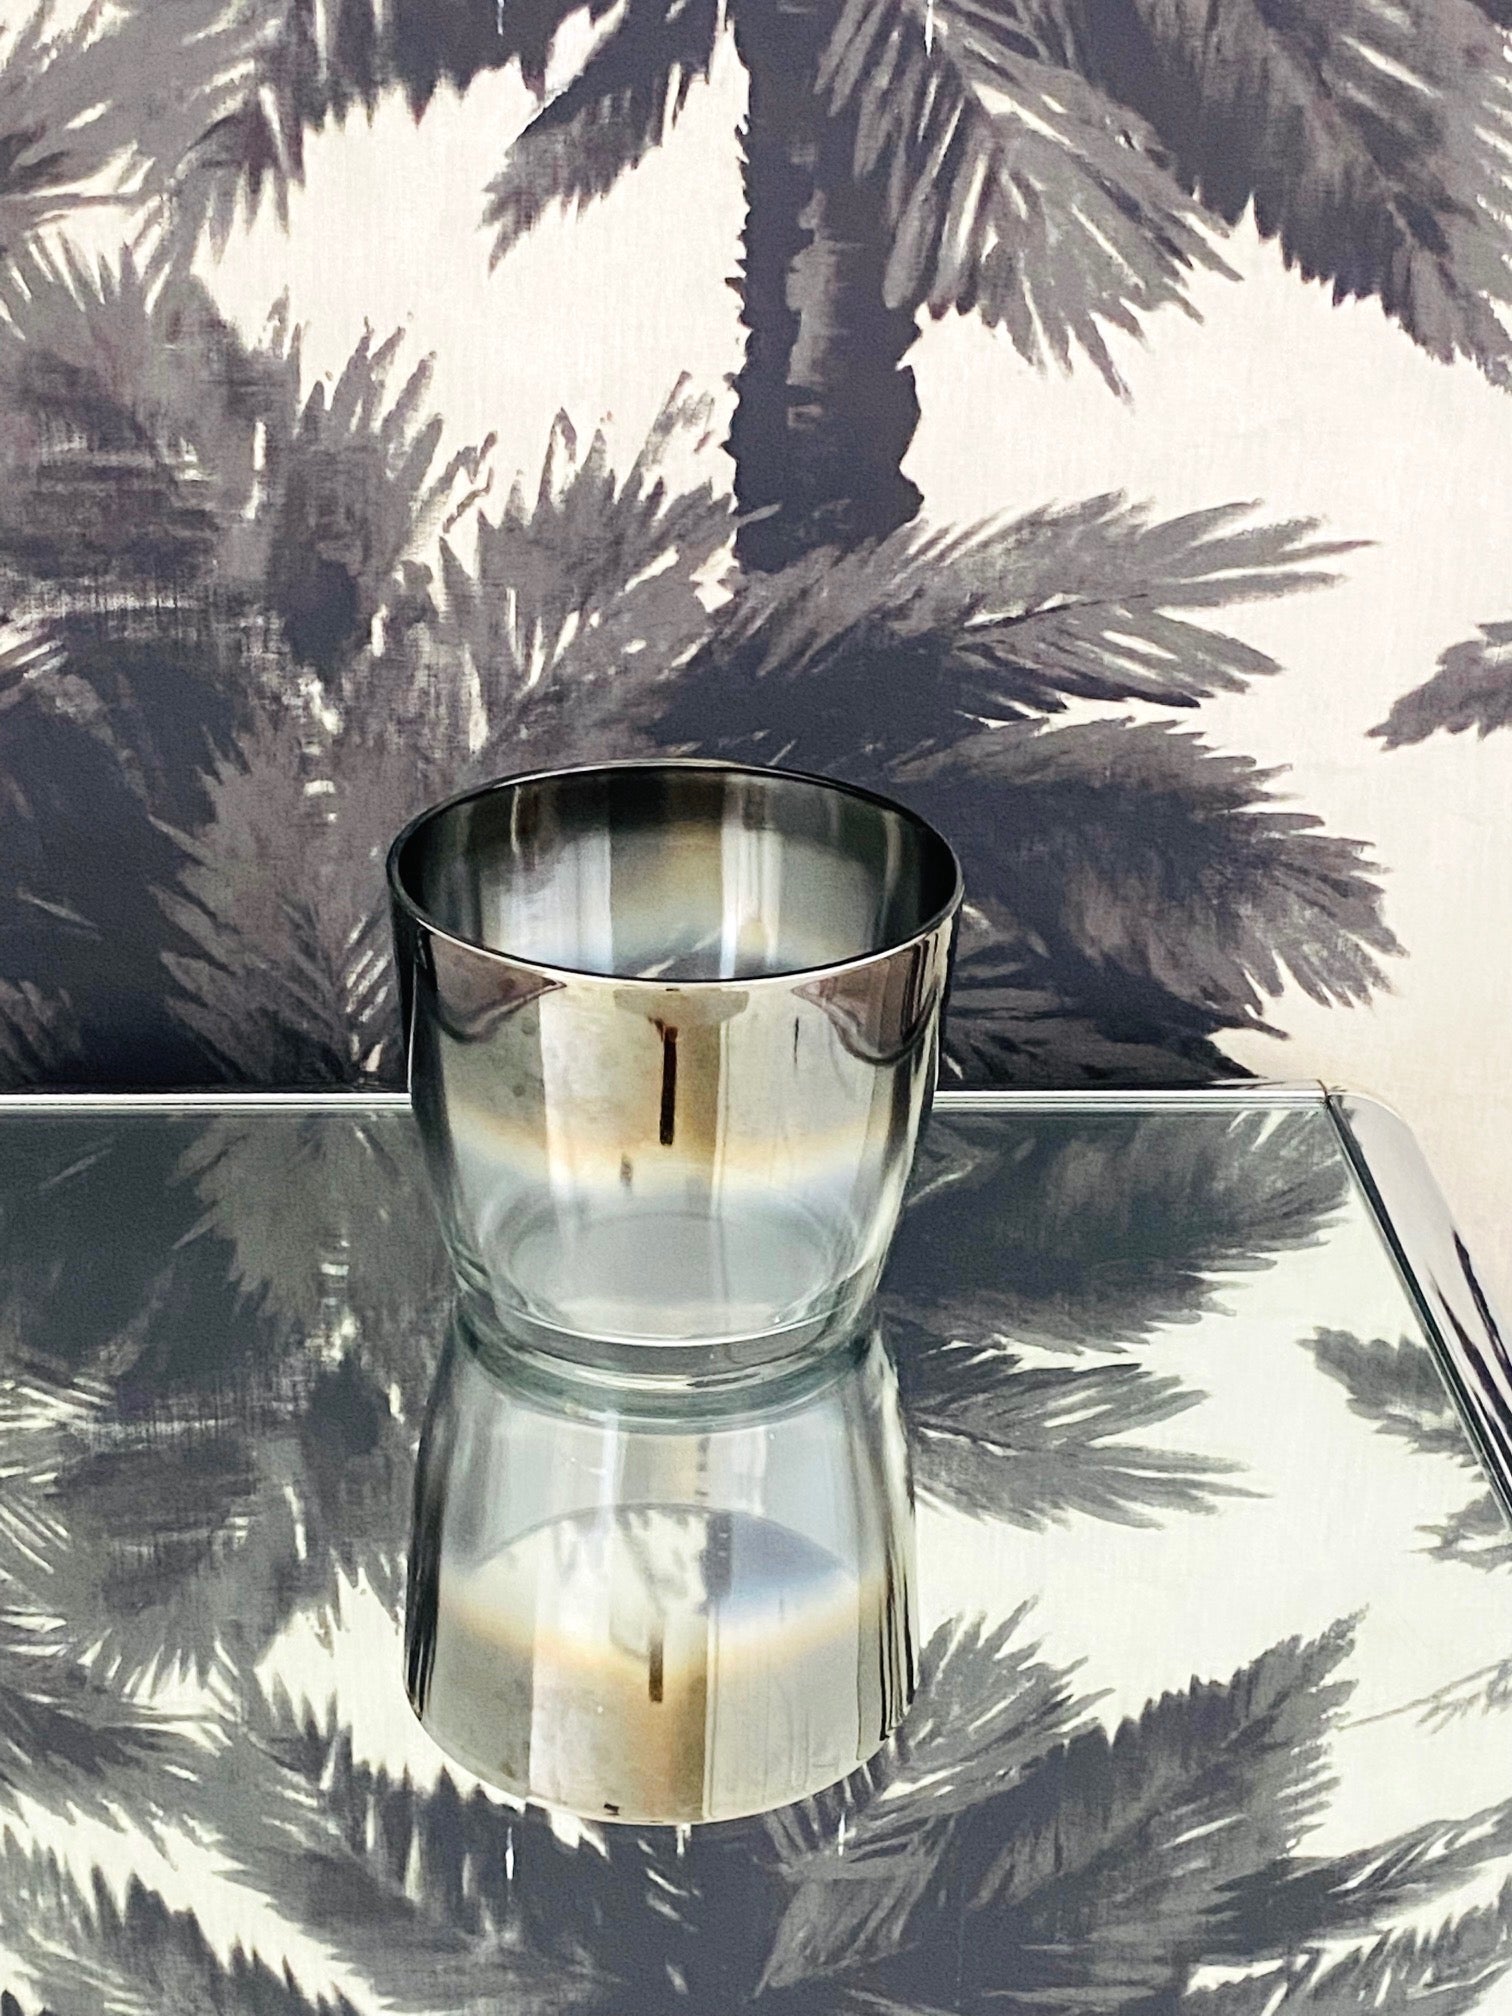 North American Mid-Century Modern Ice Bucket with Silver Fade Ombré Design, c. 1960's